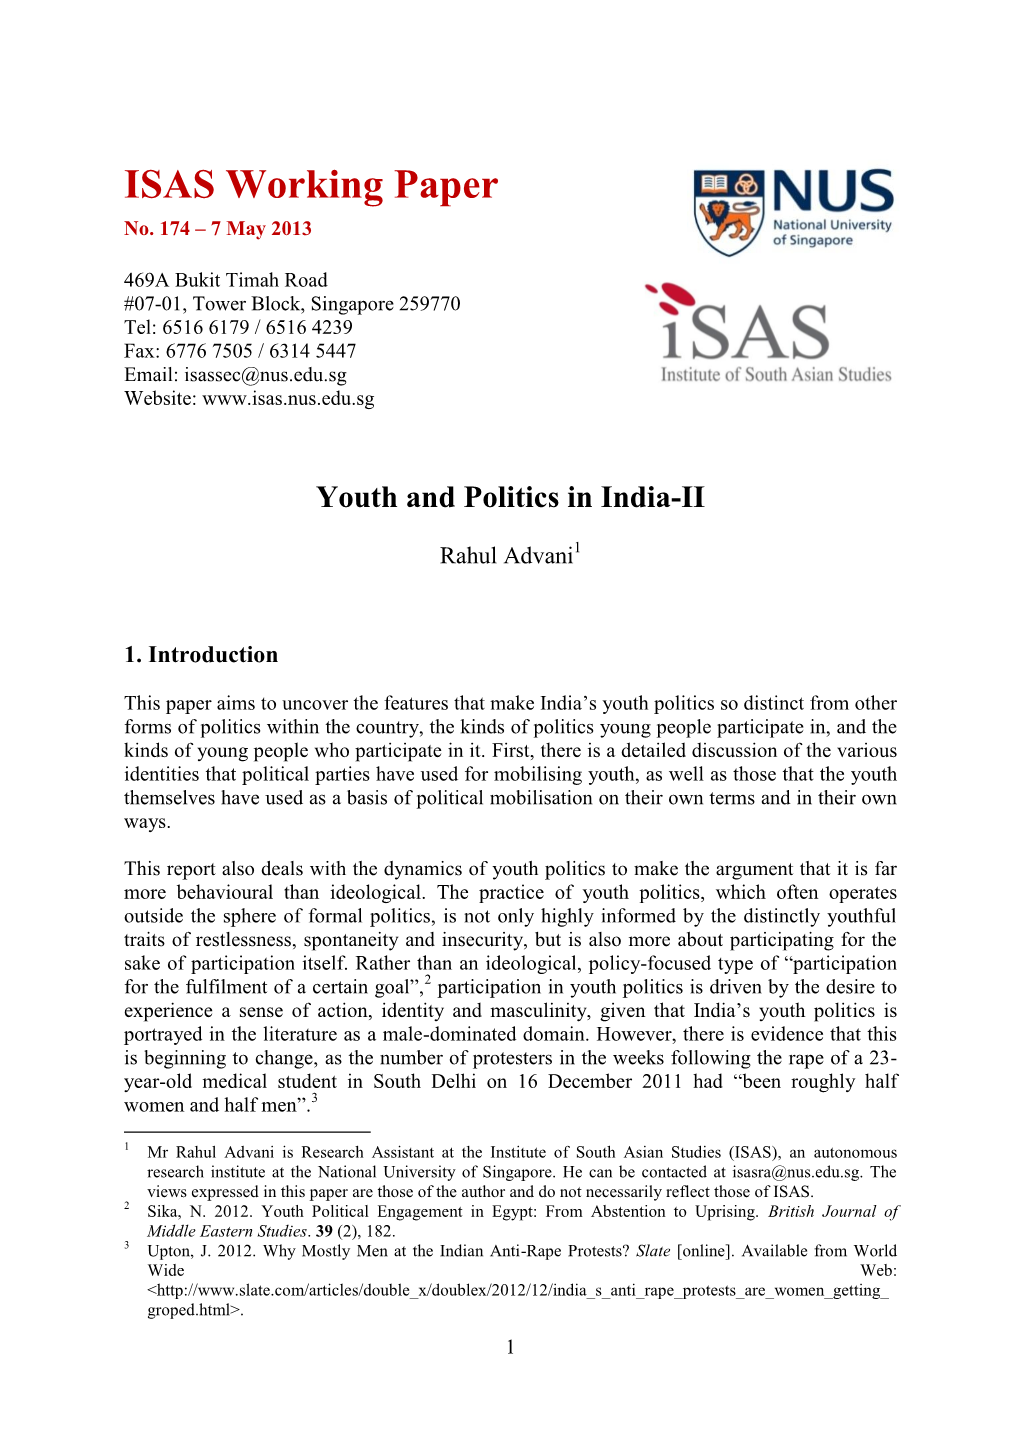 Youth and Politics in India-II